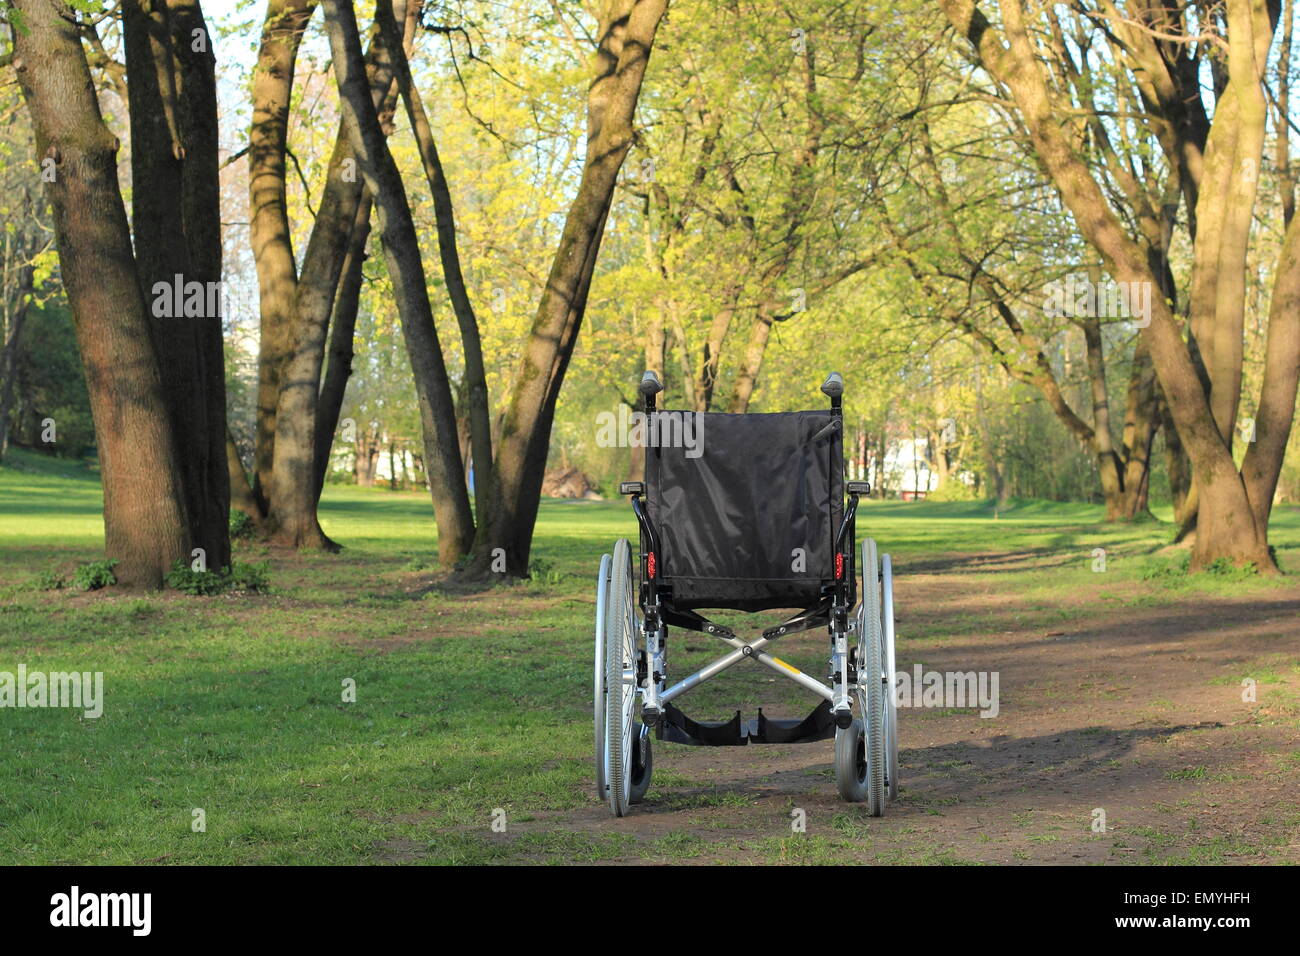 A Empty wheelchair standing in a park Stock Photo